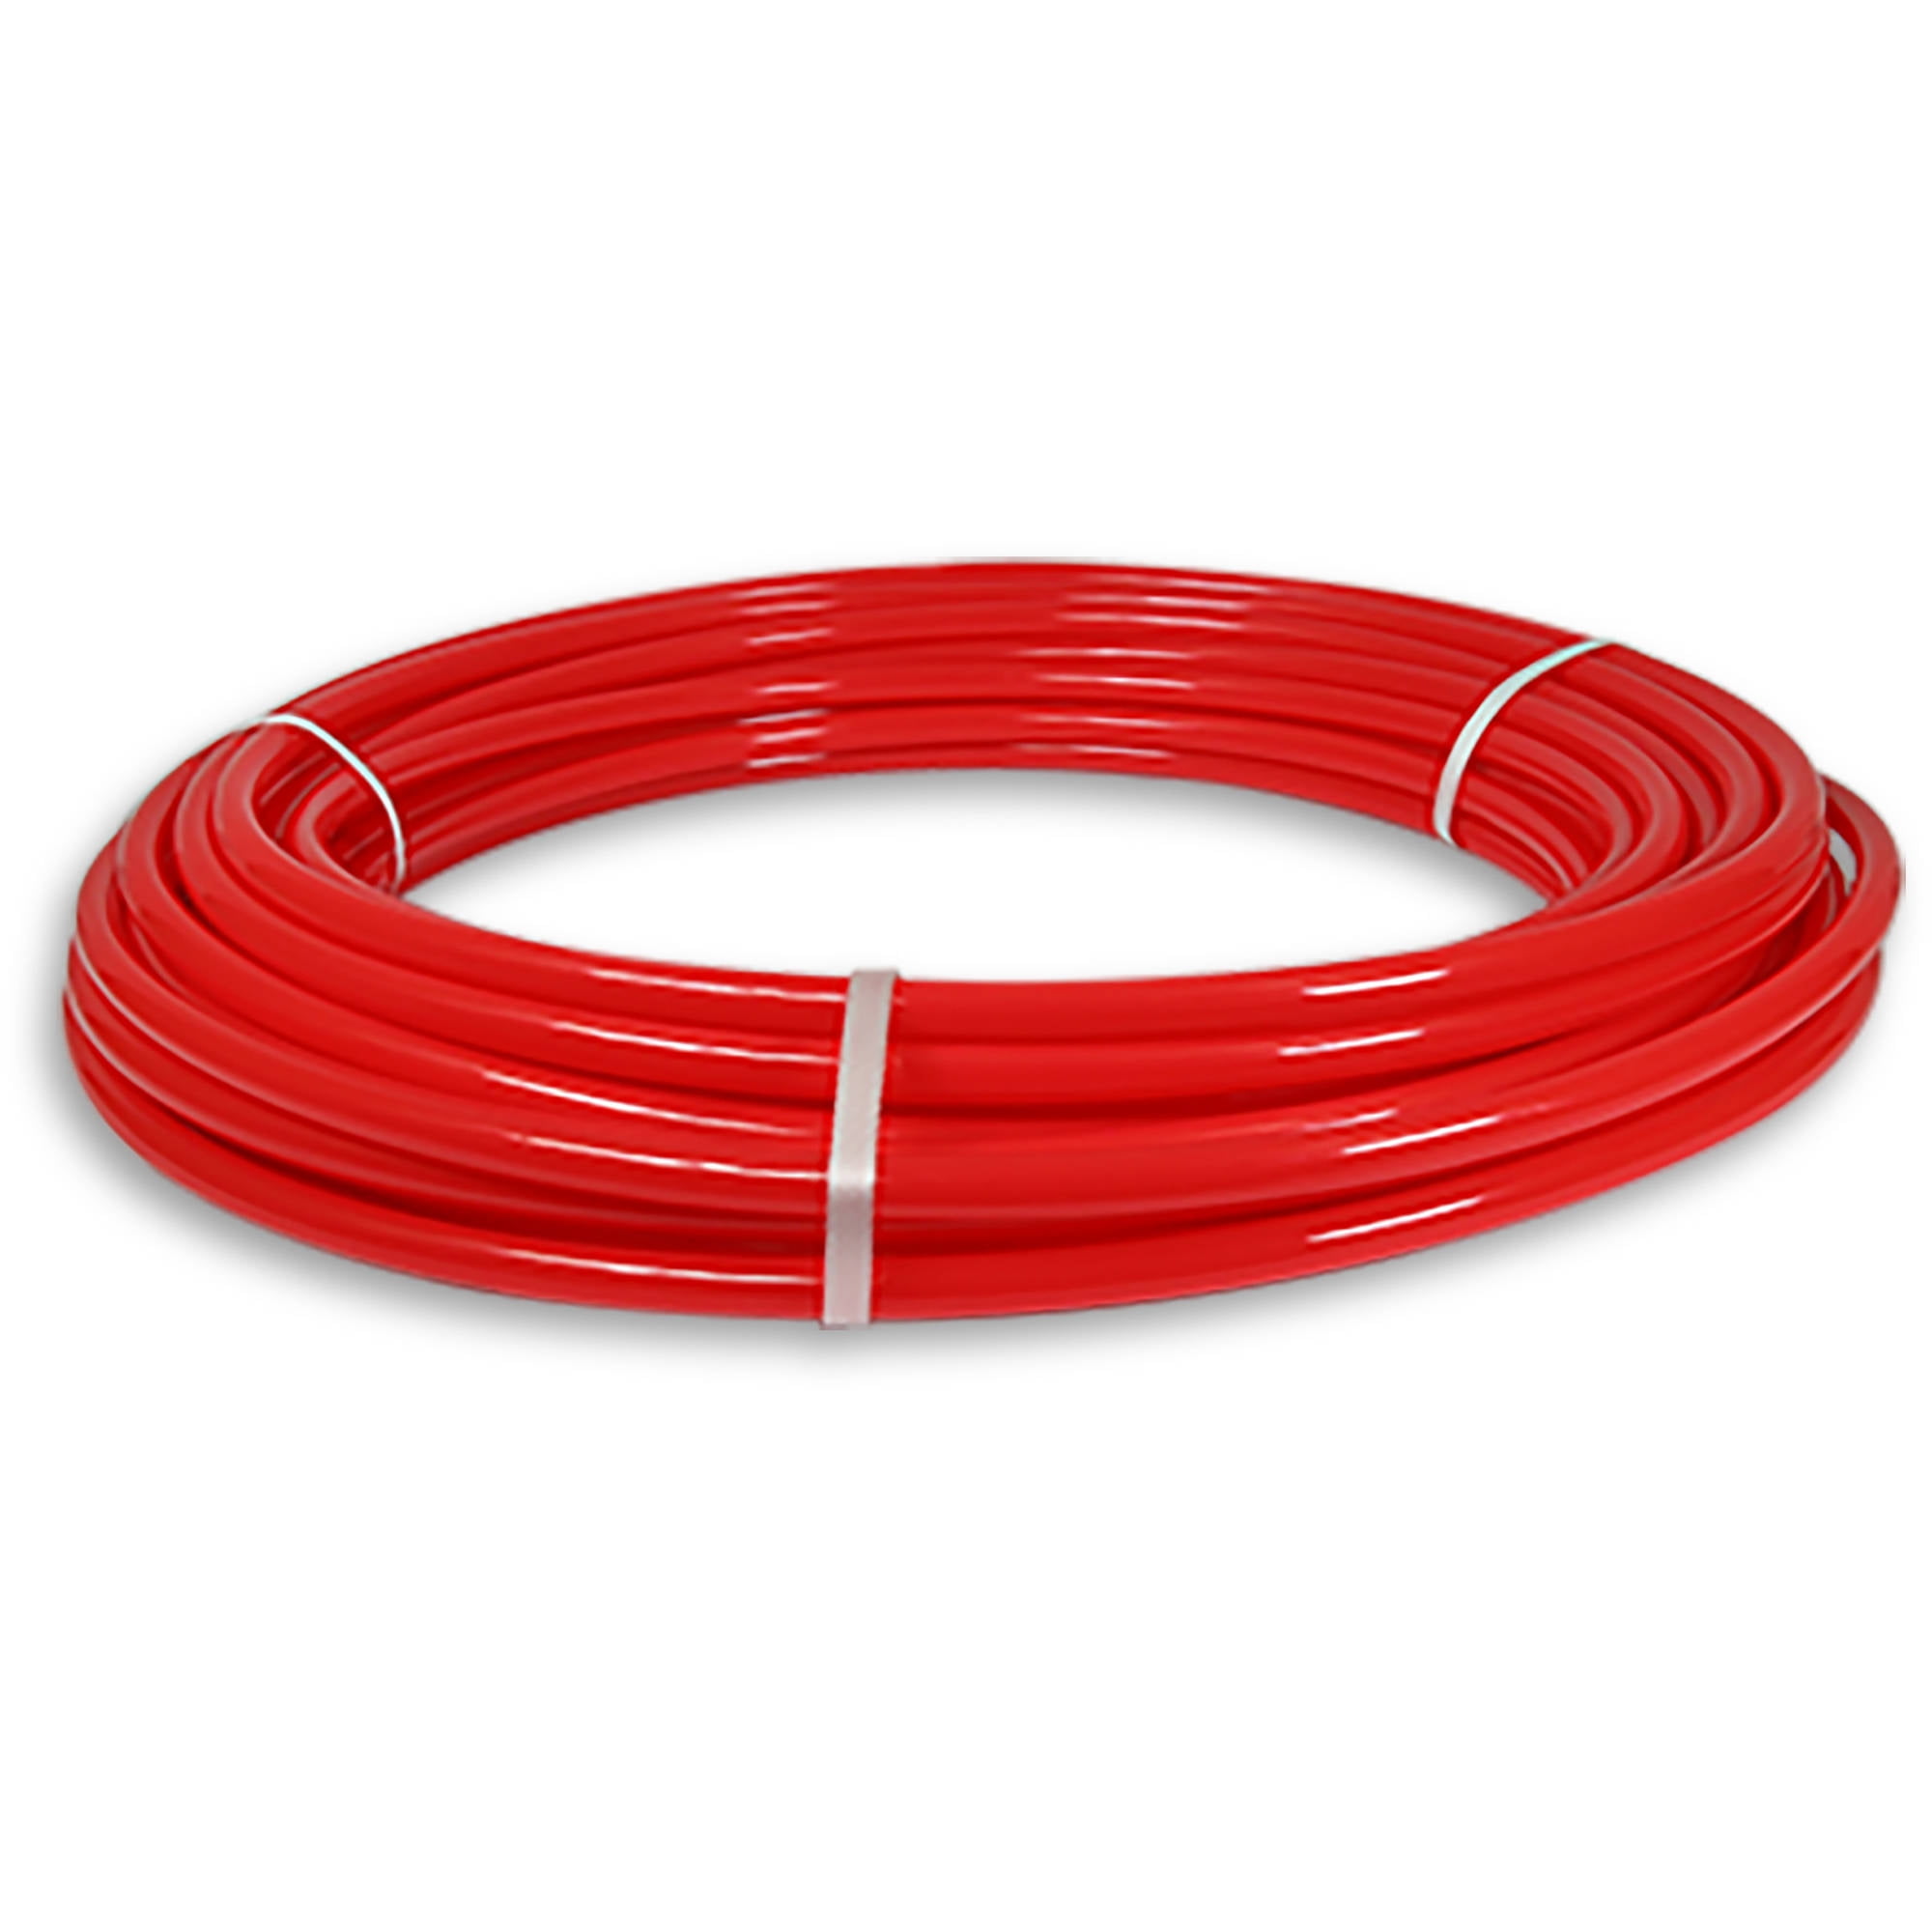 3/4" x 100' RED PEX NON-BARRIER PIPE FOR HOT AND COLD PLUMBING 